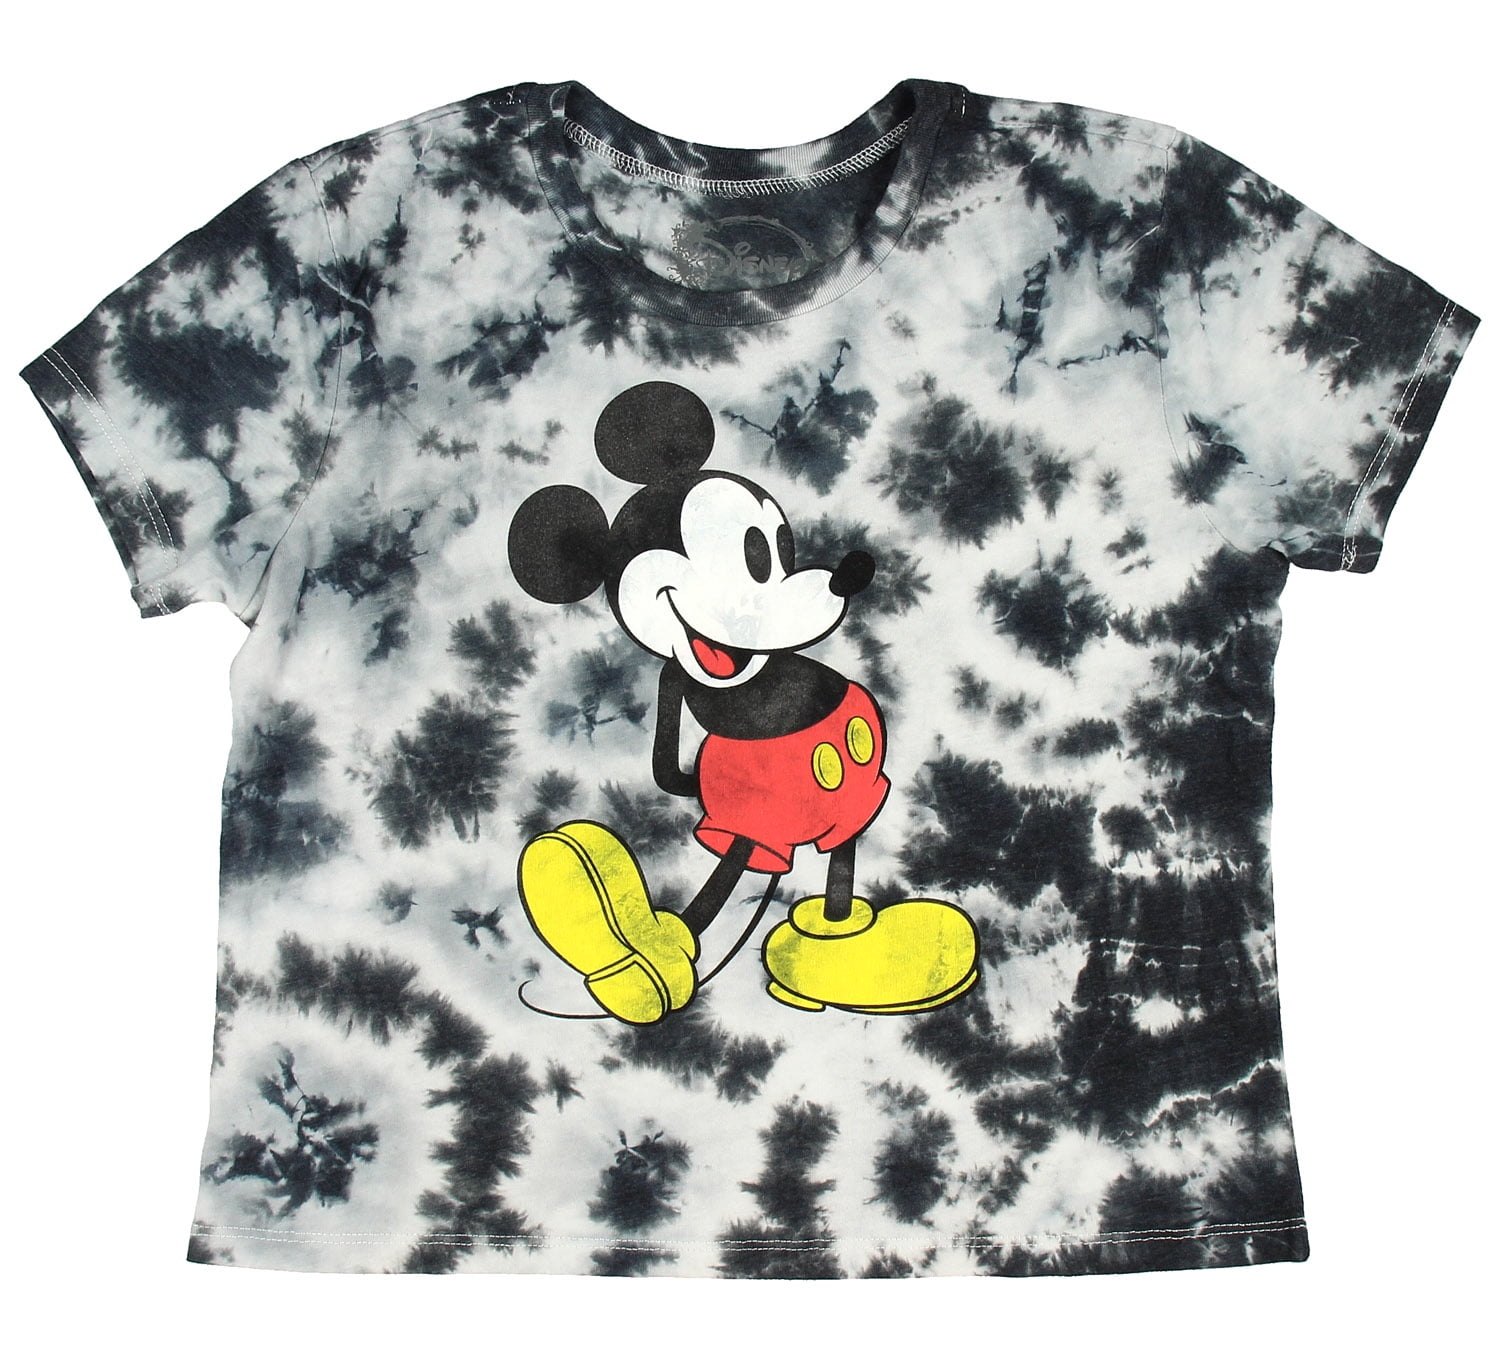 Disney Junior Multicolored Tie Dye Mickey Mouse Gray Crop Top Shirts for Girls